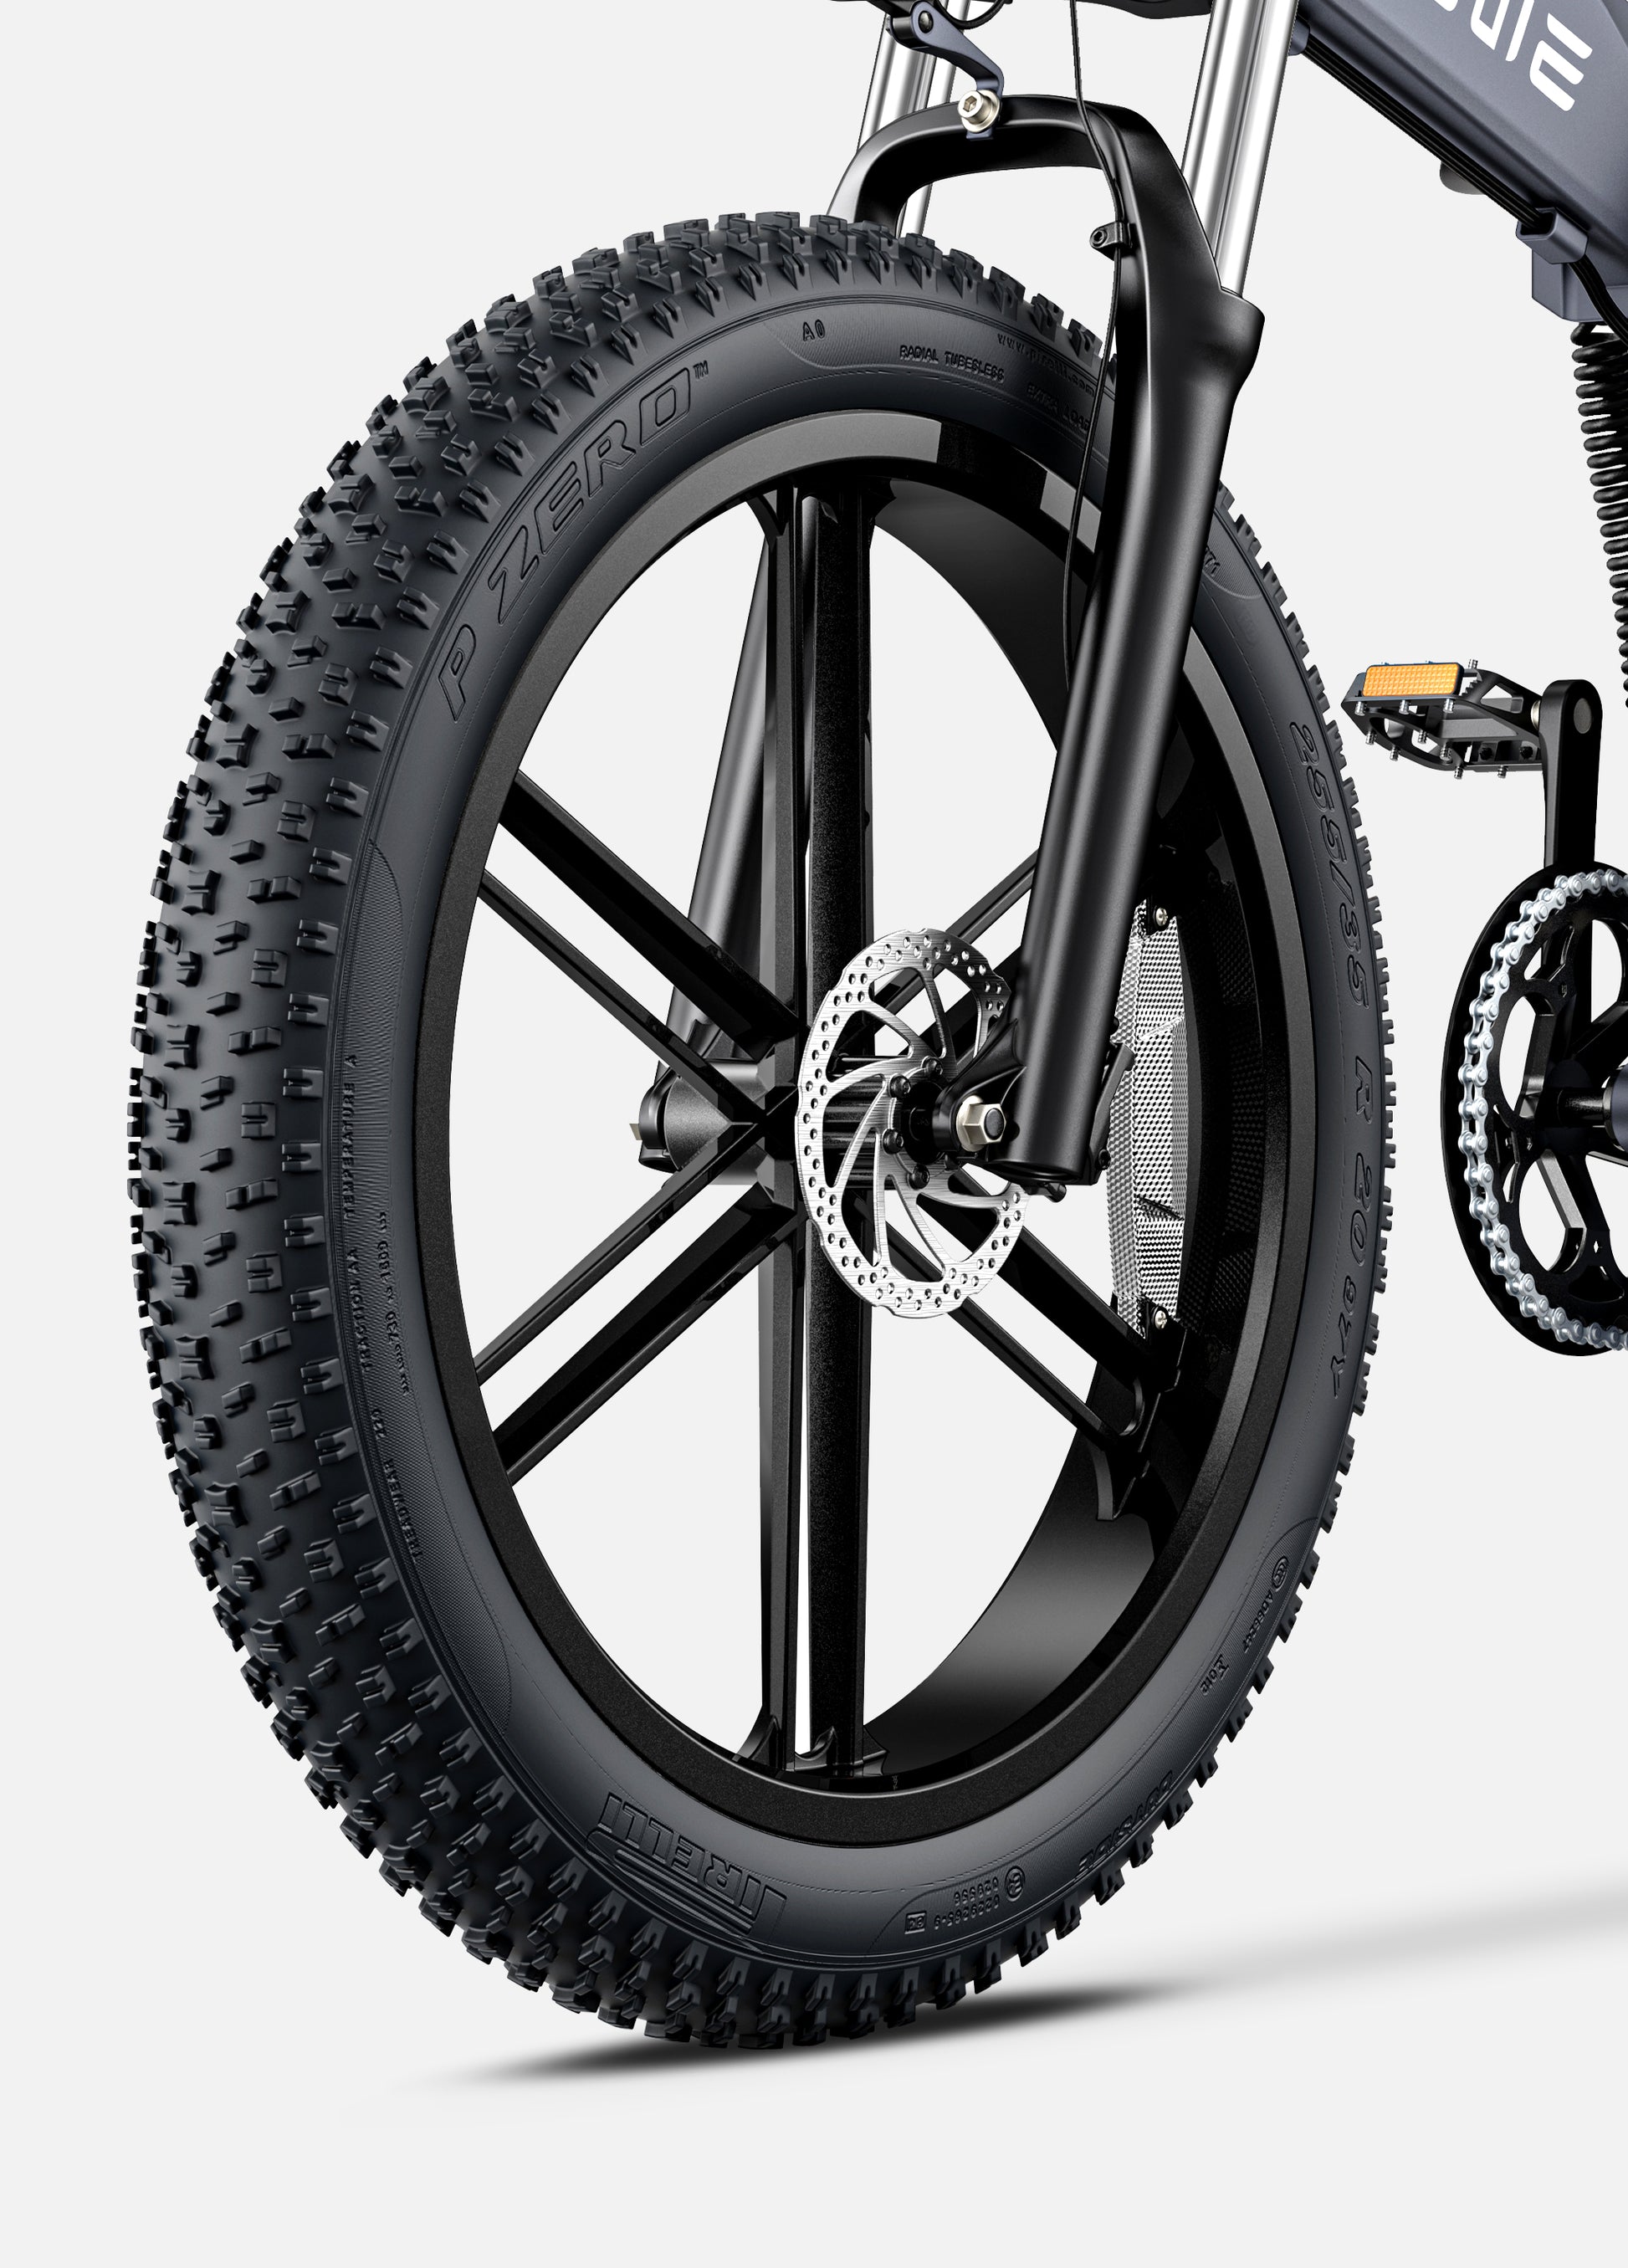 Robust tire and disc brake system of Engwe X26 ebike, highlighting its all-terrain and safety features.